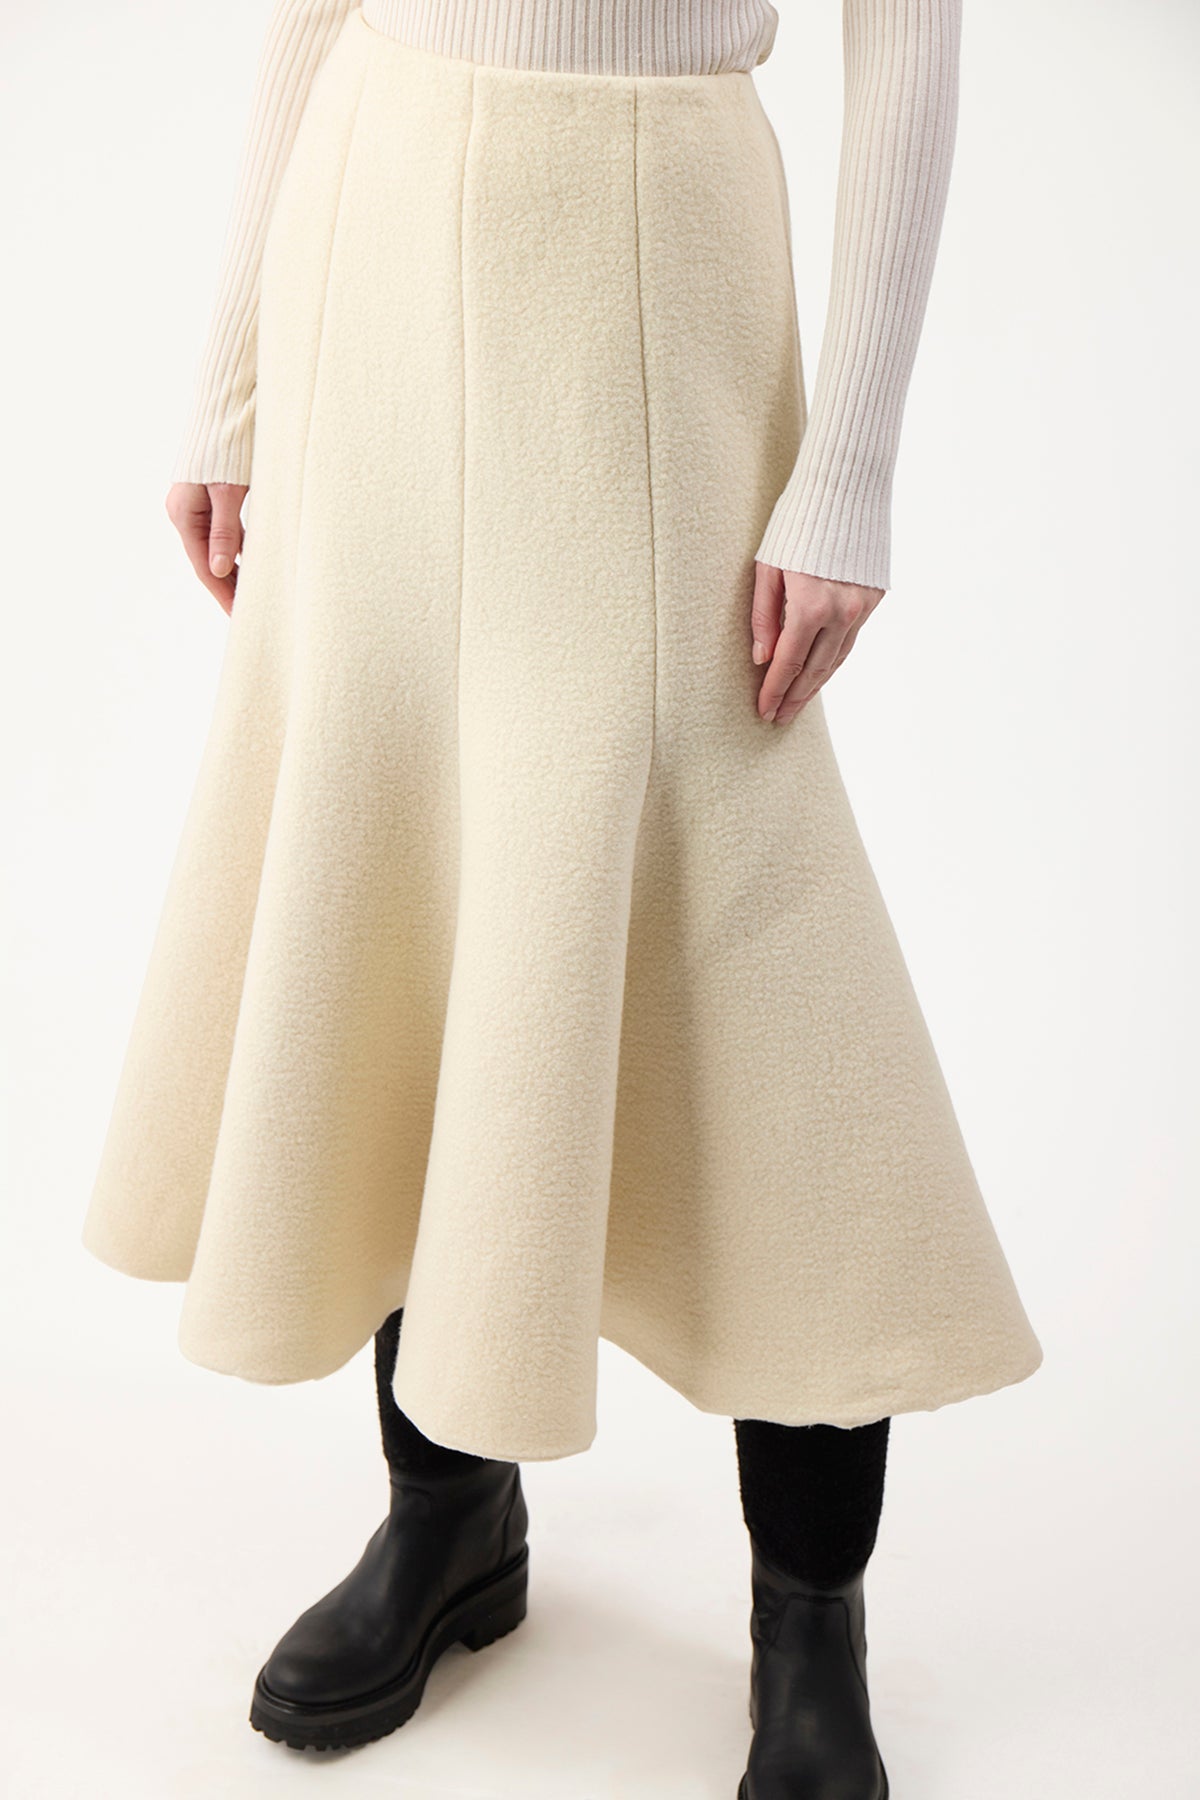 Amy Skirt in Ivory Recycled Cashmere Felt